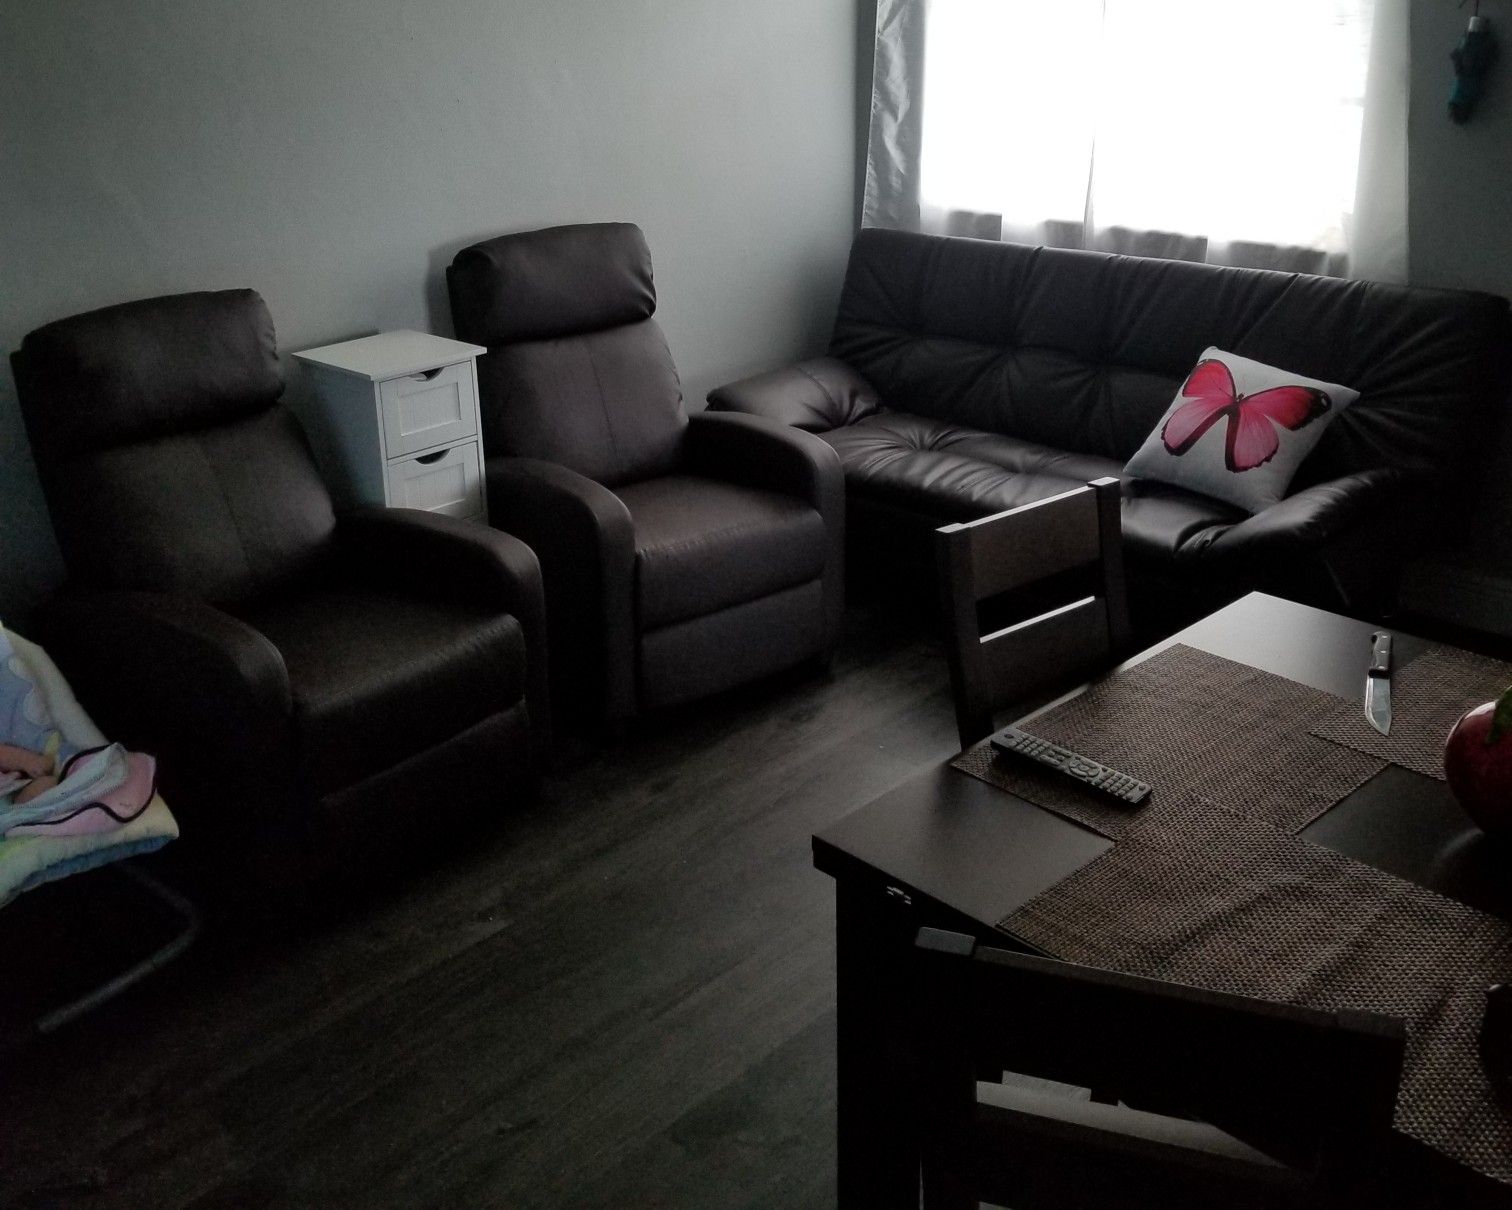 1 month used, all furnitures for sale ( PRICES on DESCRIPTION )